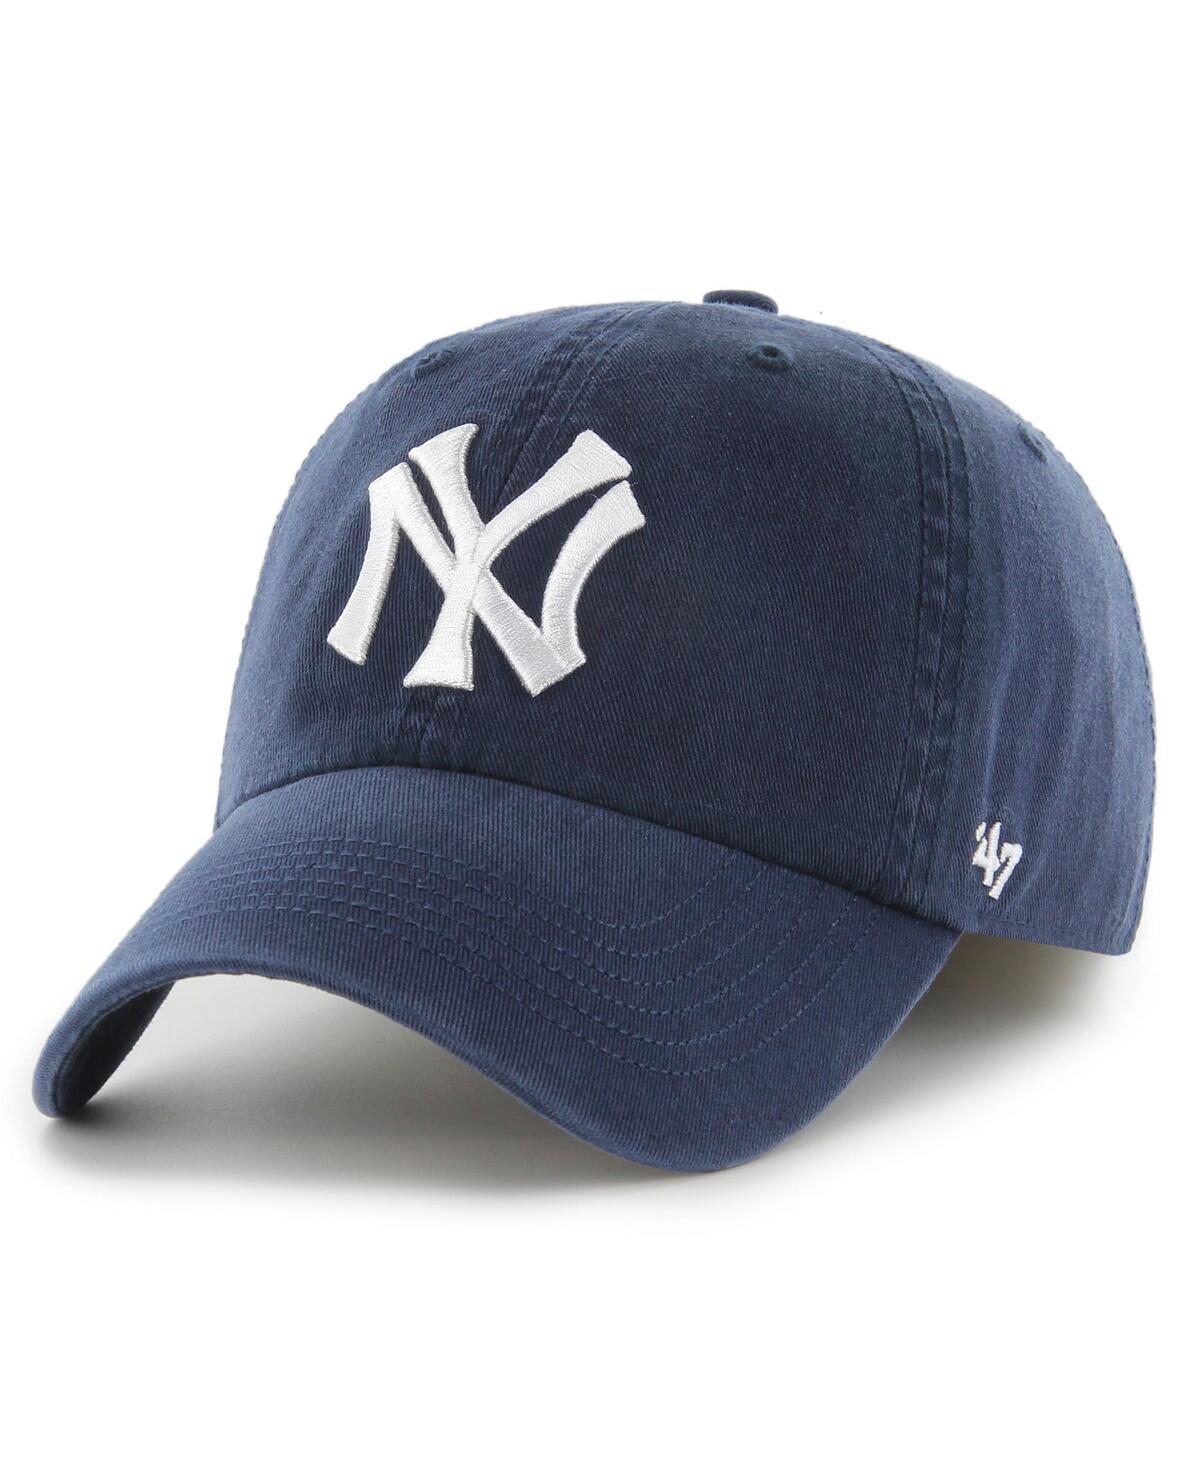 Men's '47 Brand Navy New York Yankees Cooperstown Collection Franchise Fitted Hat - Navy